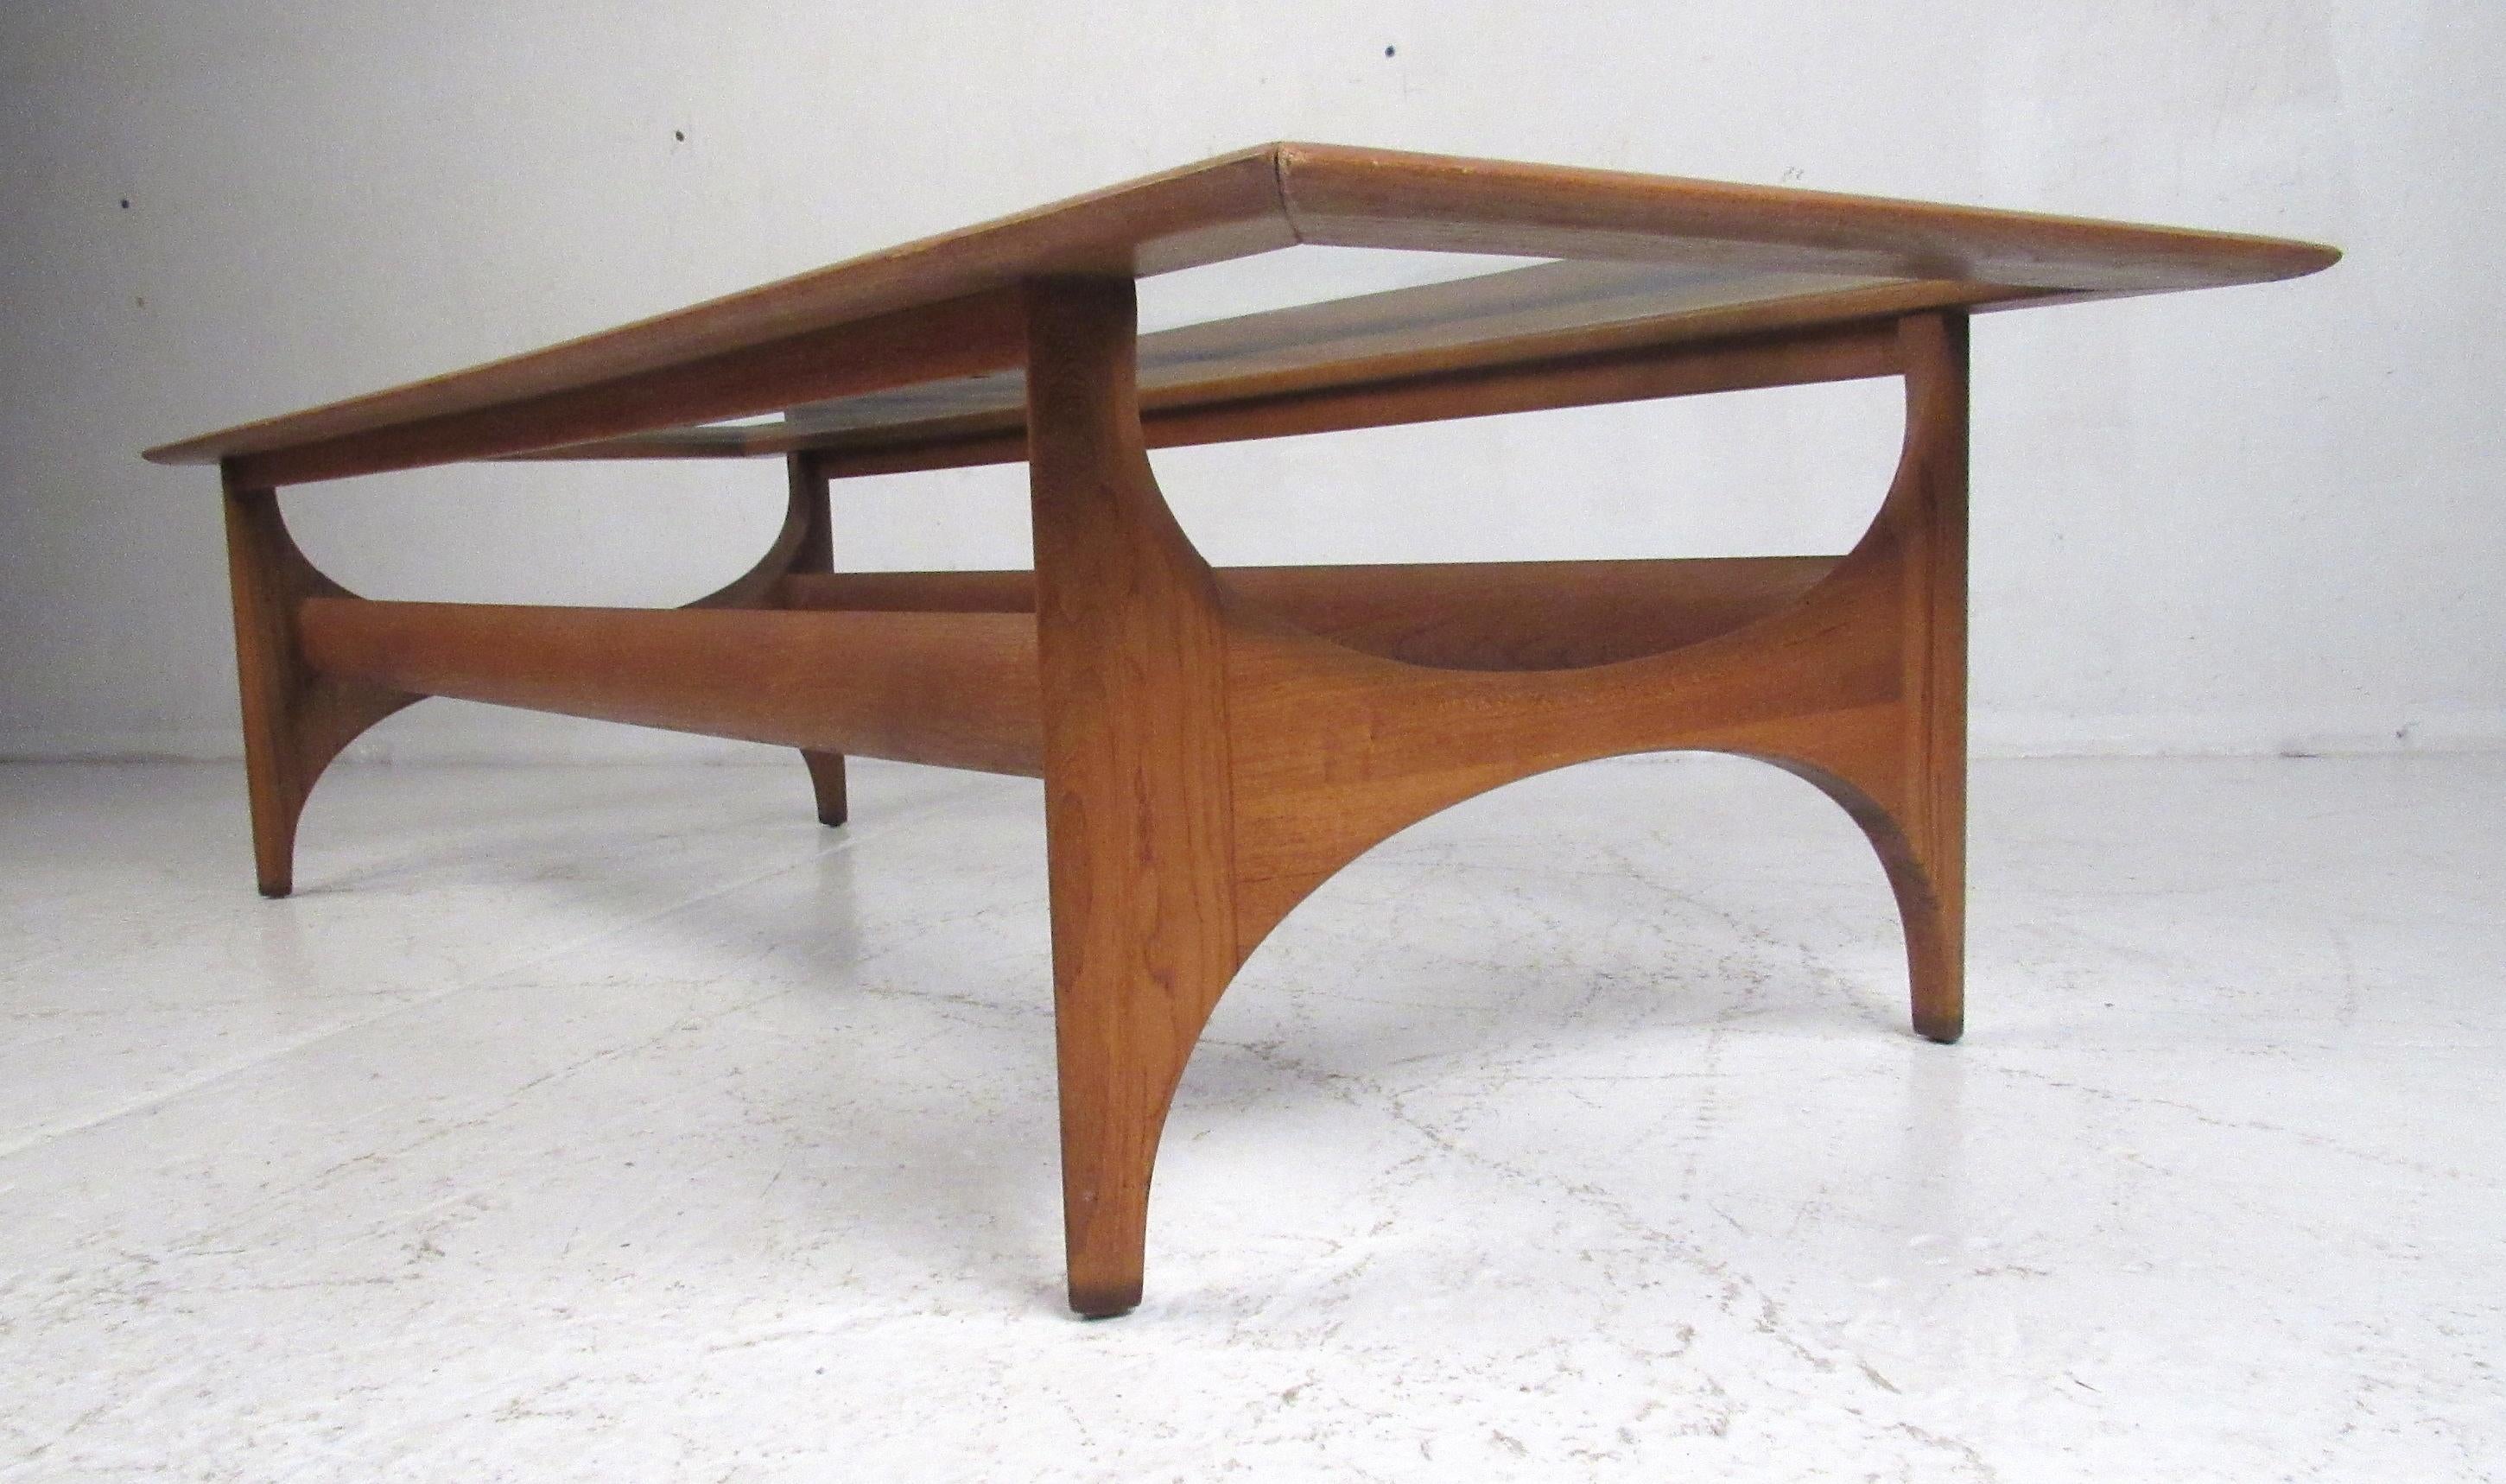 Beautiful midcentury walnut coffee table by Lane Altavista furniture. Please confirm item location (NY or NJ) with dealer.